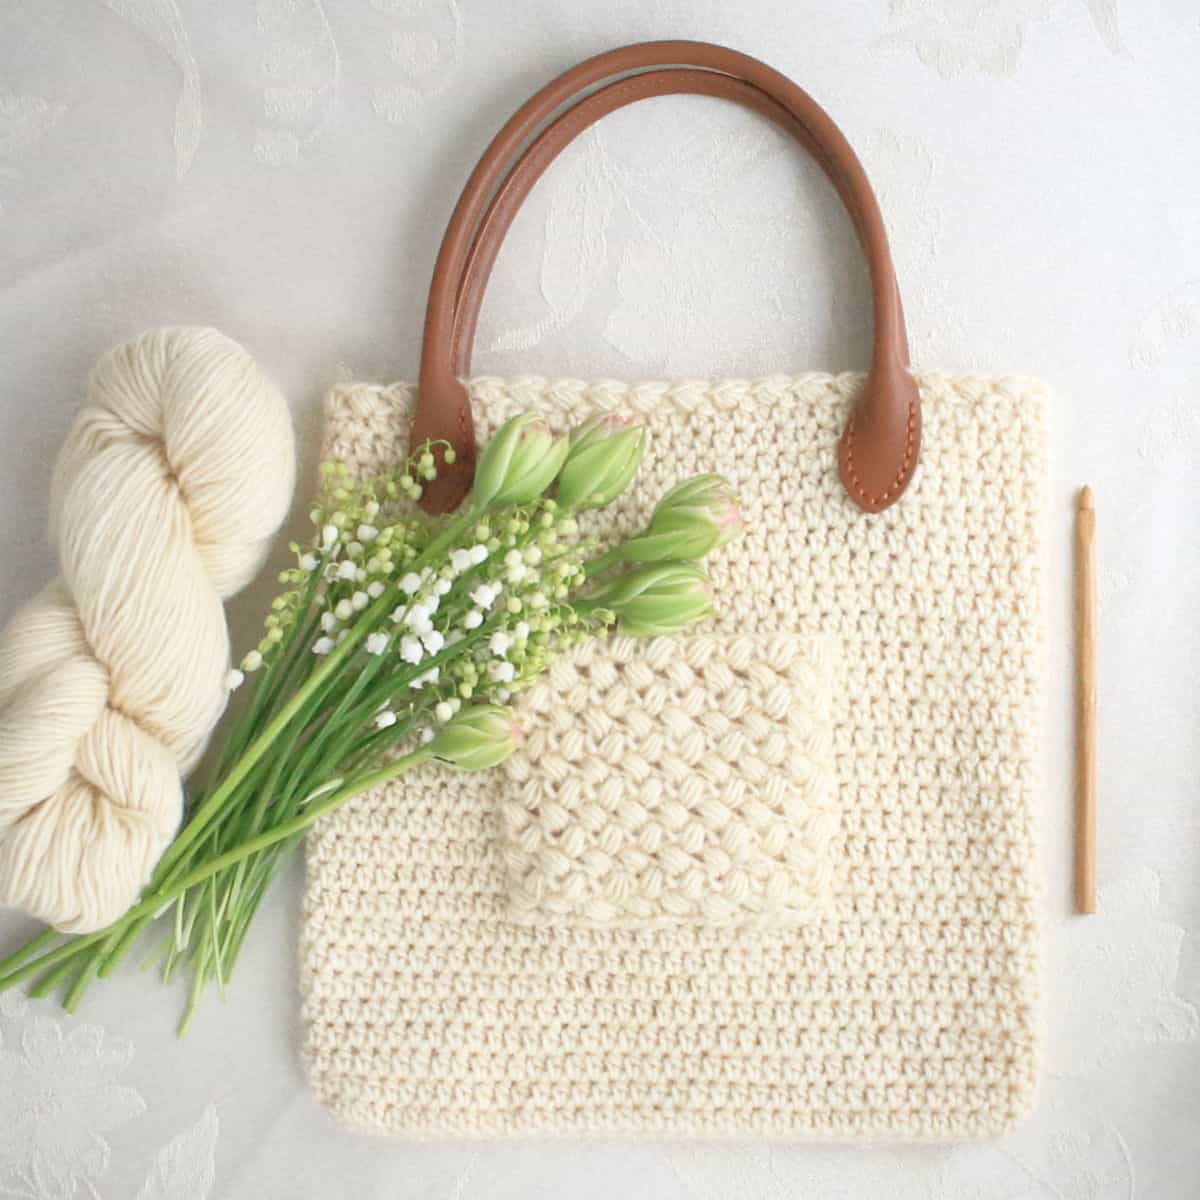 Eligere Bag with Pocket and Spring Flowers